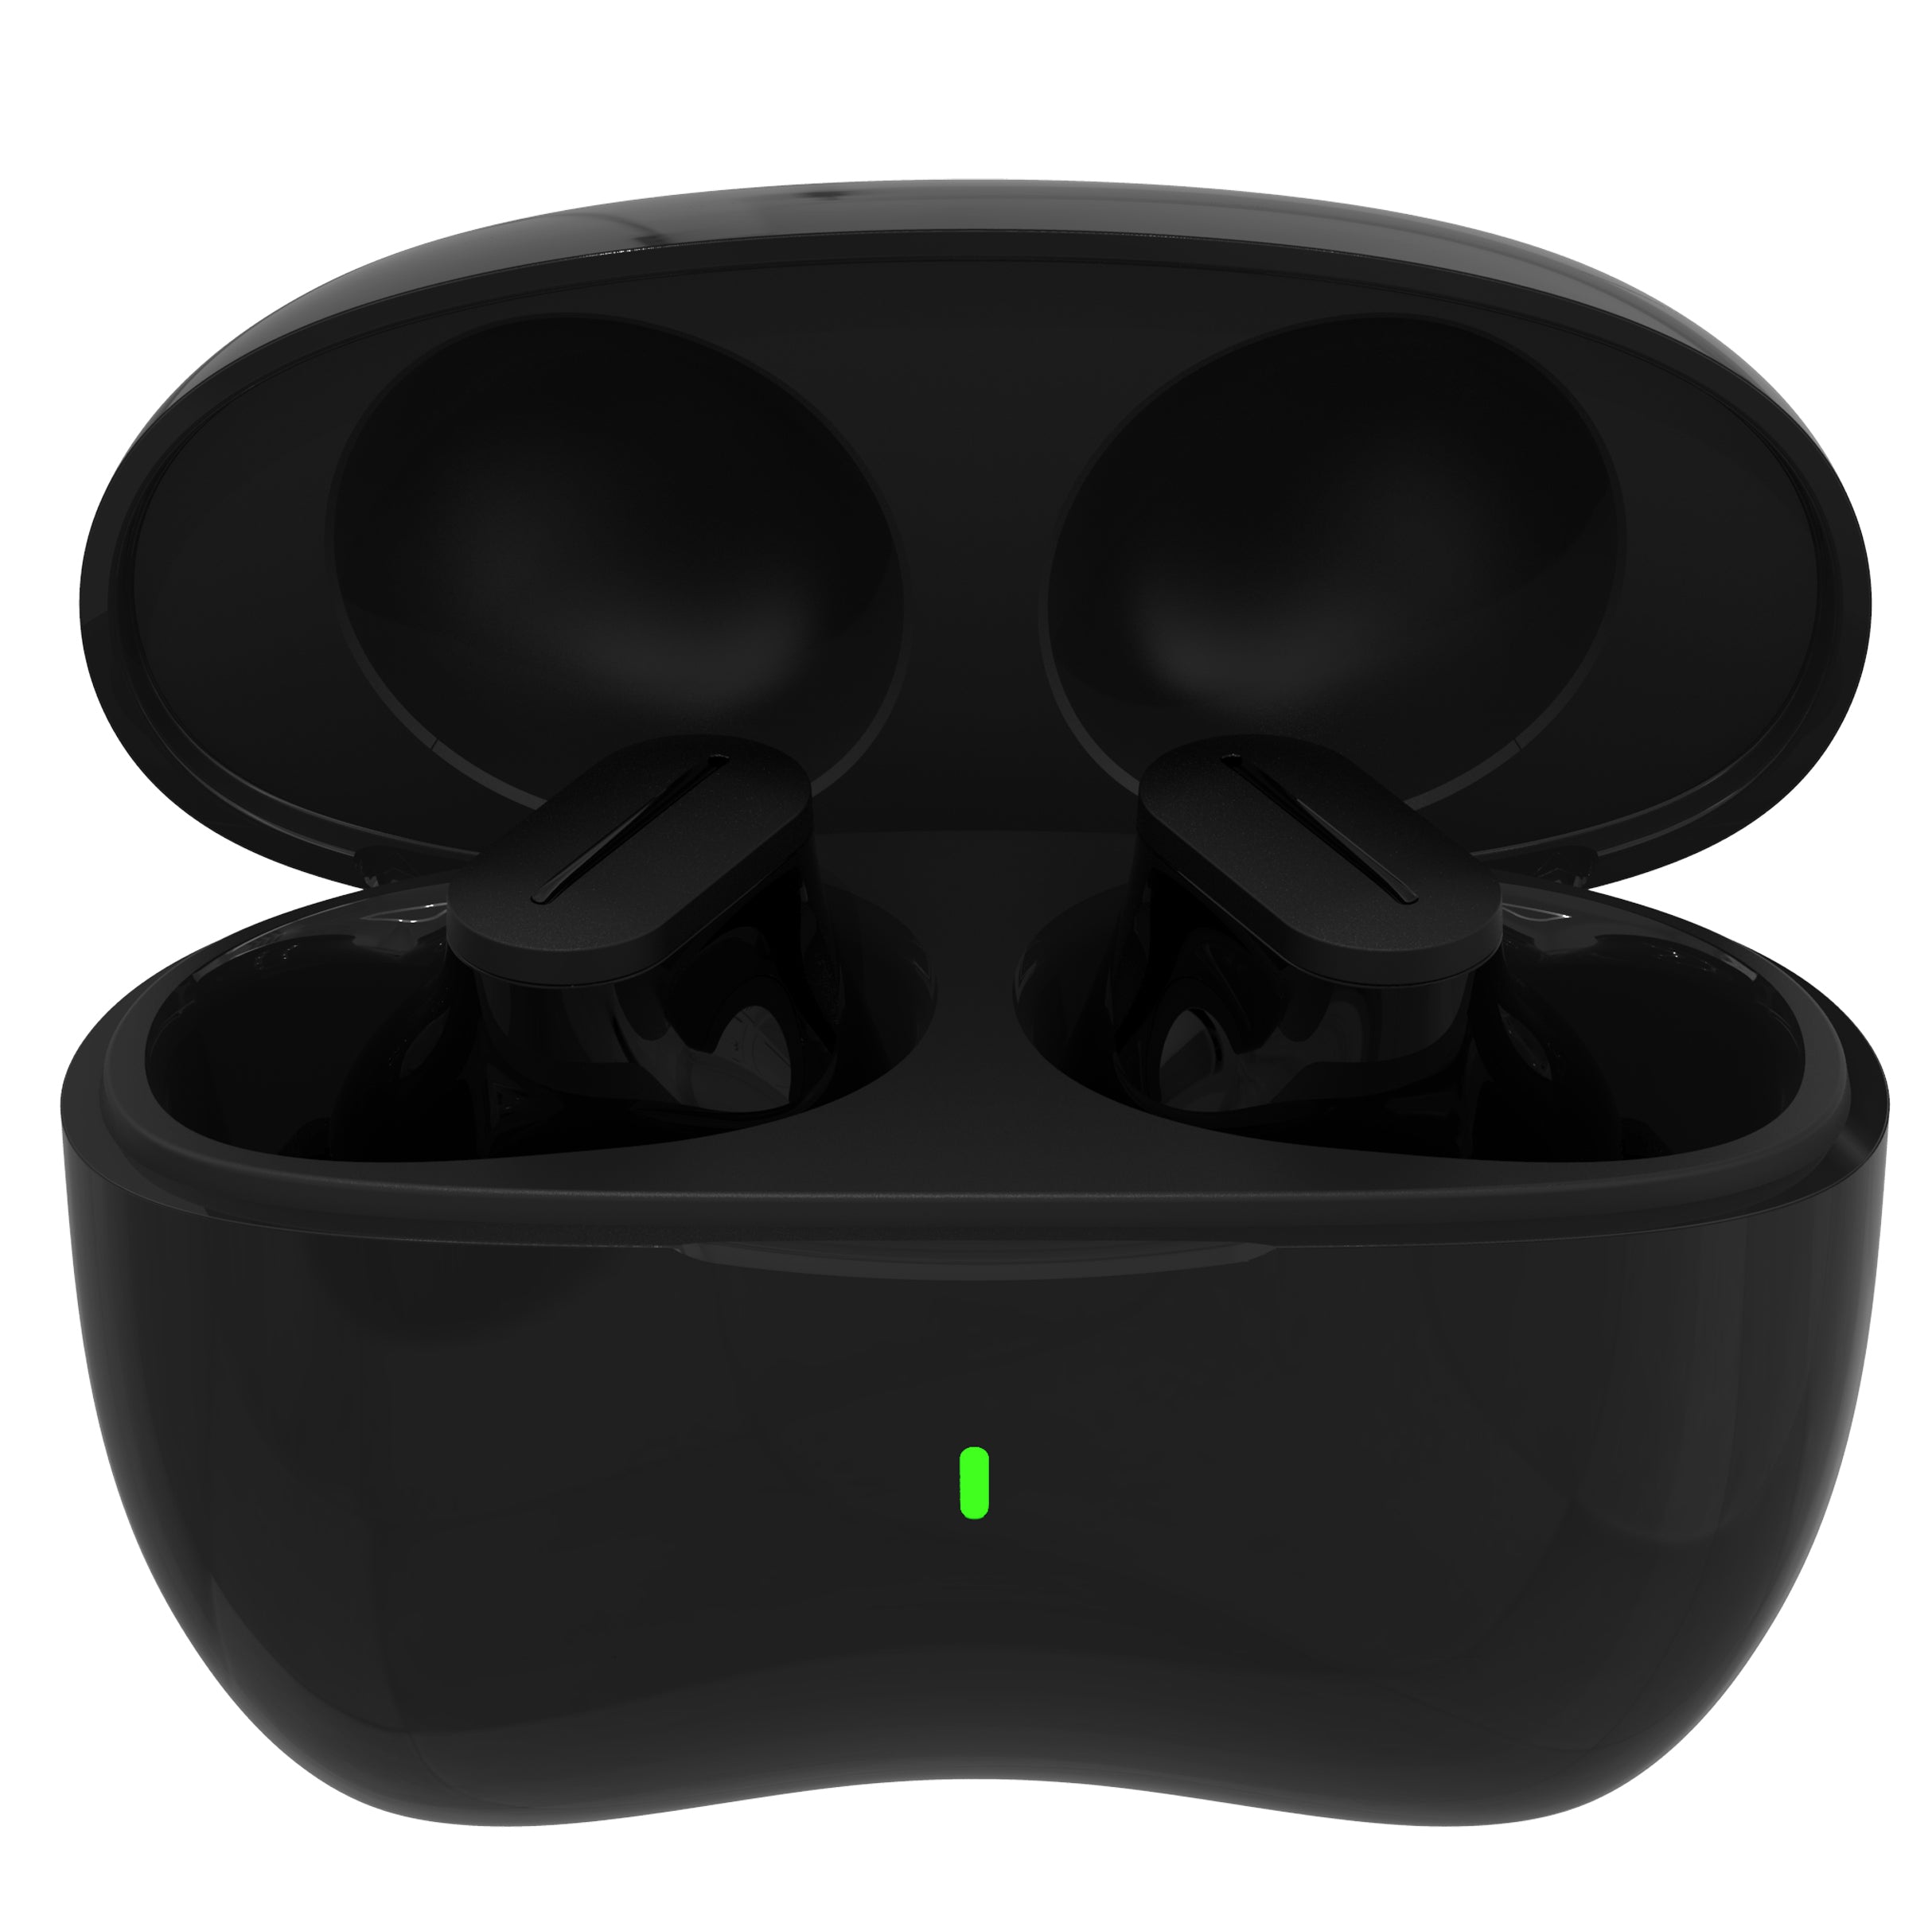 True Wireless Speaker Earbuds with Inc Charging Case – Supersonic